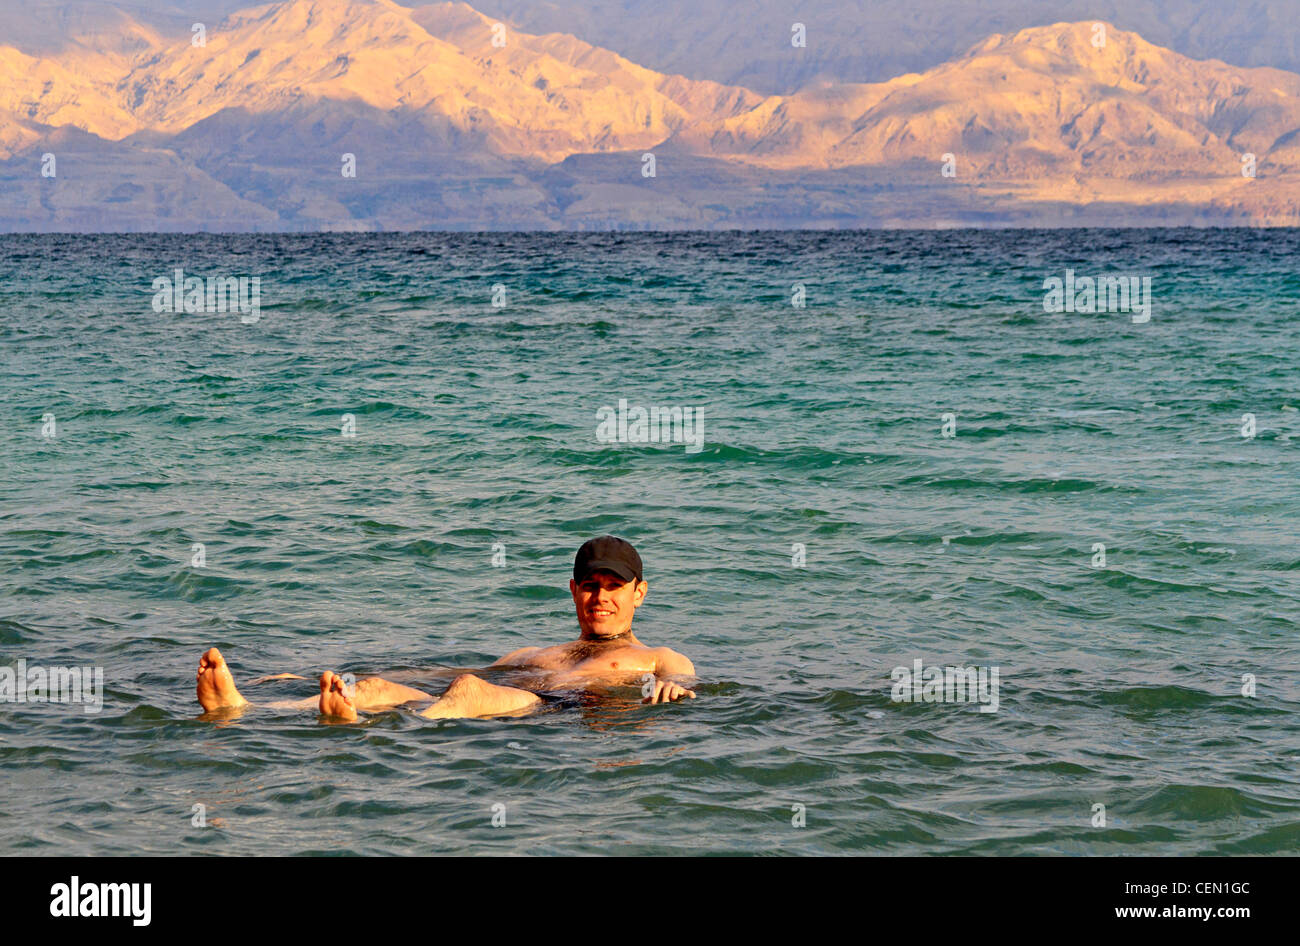 Bather floats in the super salty waters of the Dead Sea in Israel Stock Photo